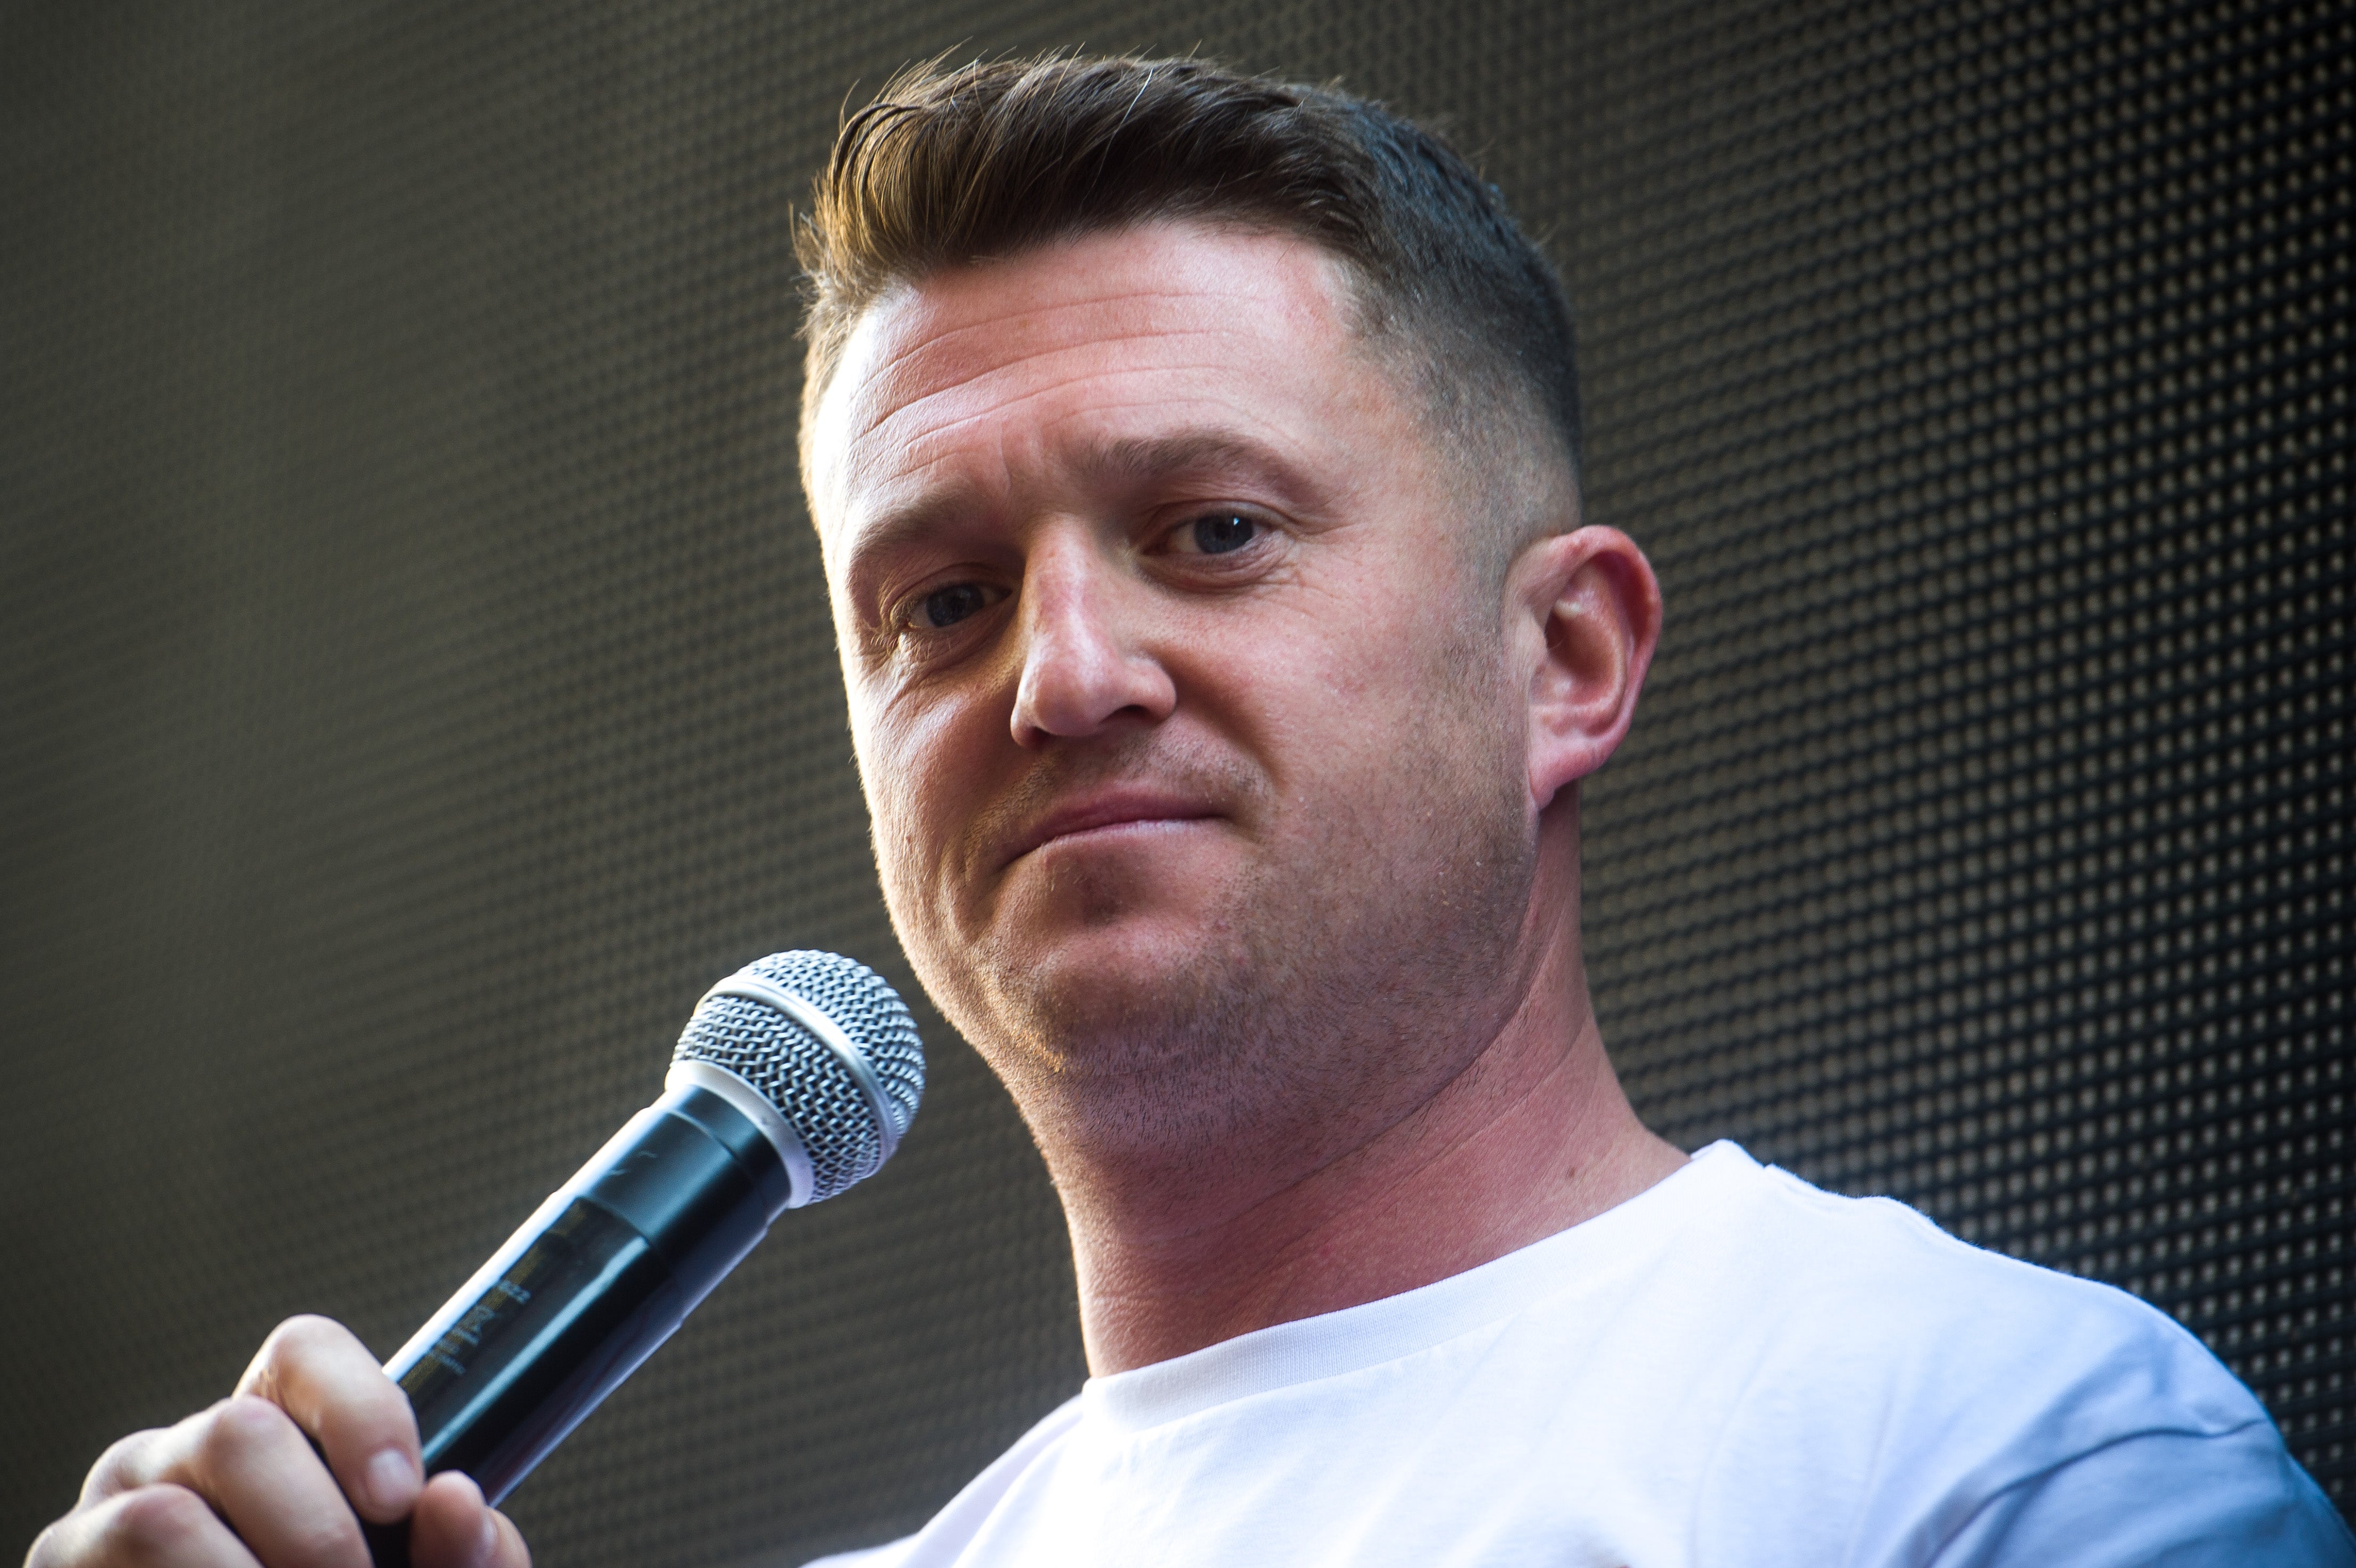 Tommy Robinson has been issued with a stalking prevention order after threatening an Independent journalist